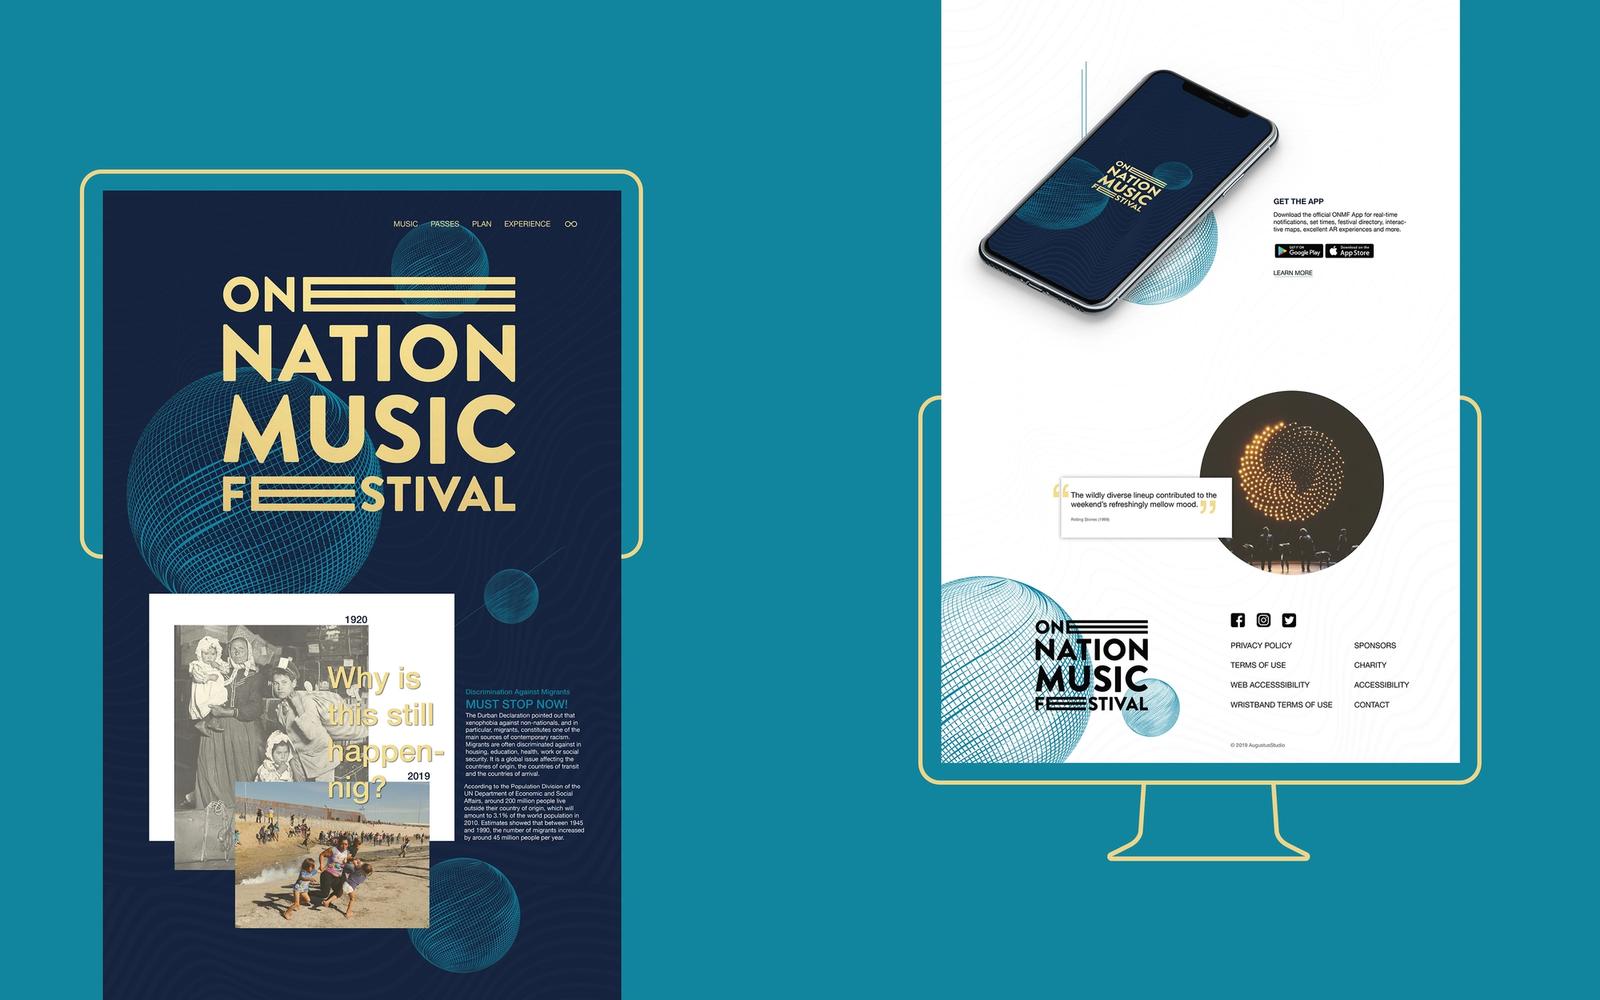 One Nation Music Festival interactive materials